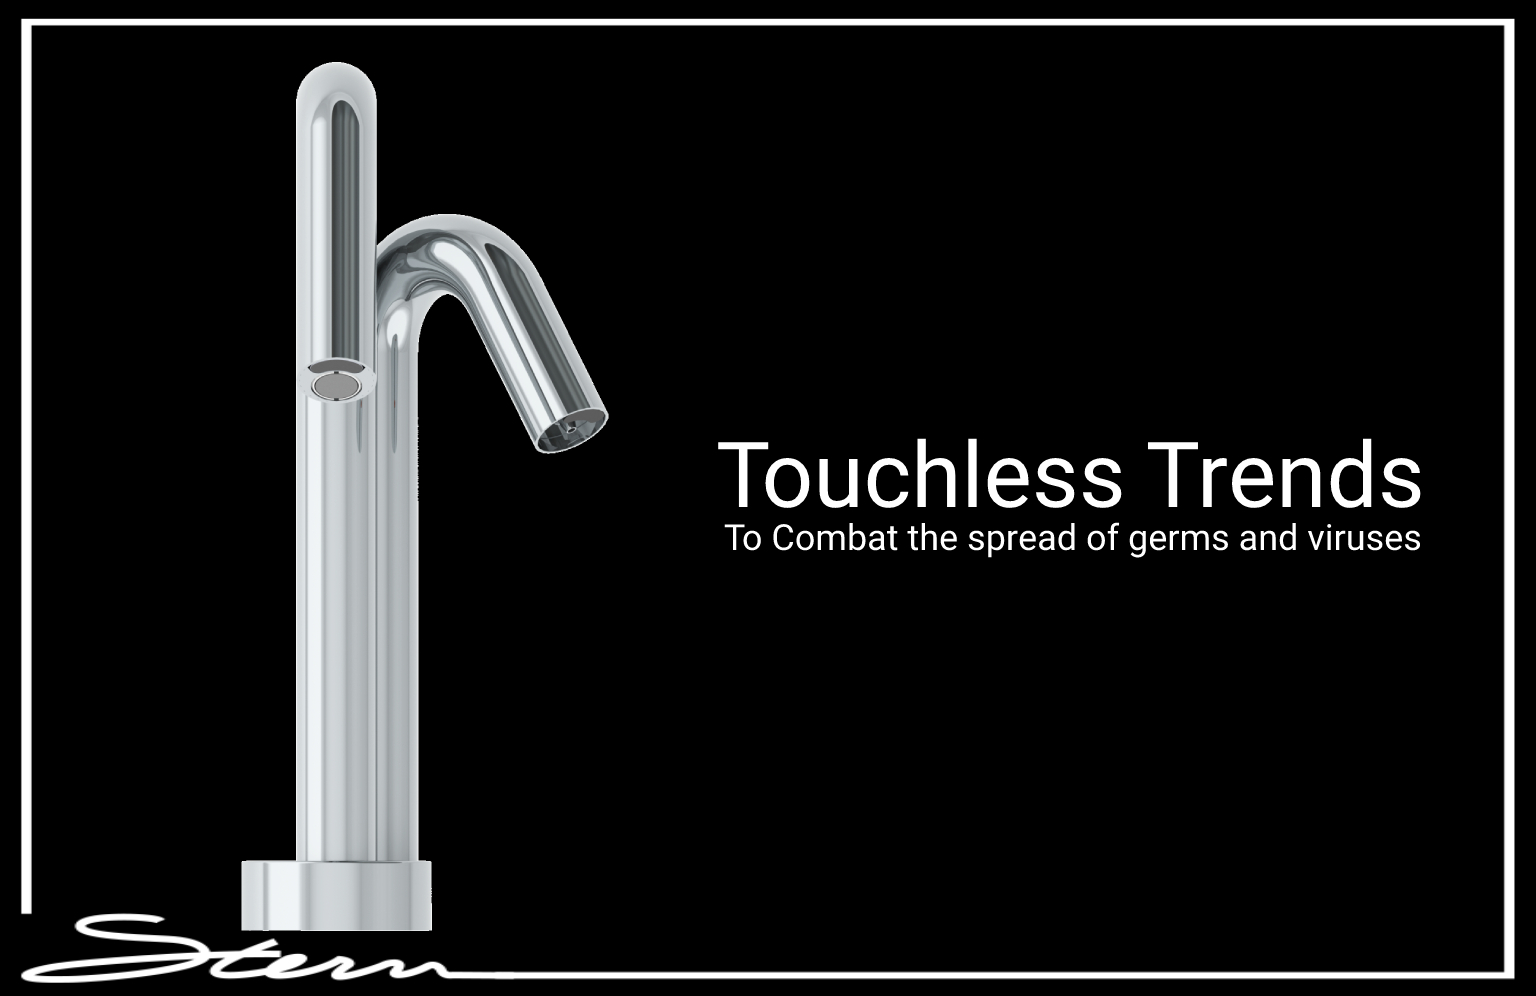 Architects at work - The touchless commercial bathroom trends